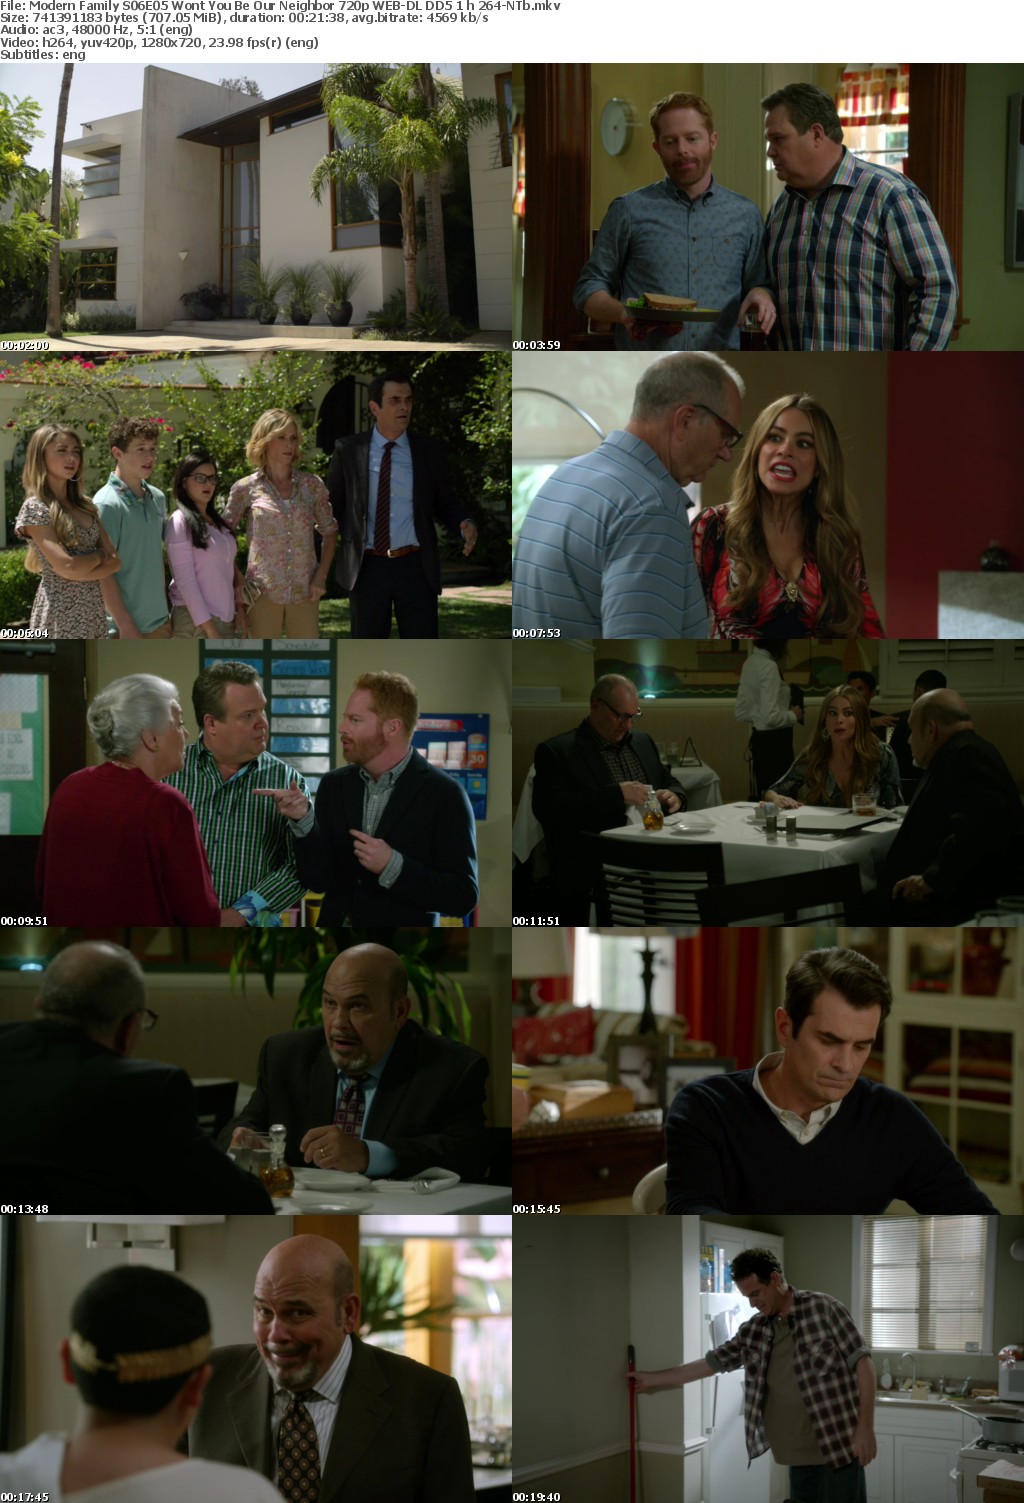 Modern Family S06E05 Wont You Be Our Neighbor 720p WEB-DL DD5 1 h 264-NTb